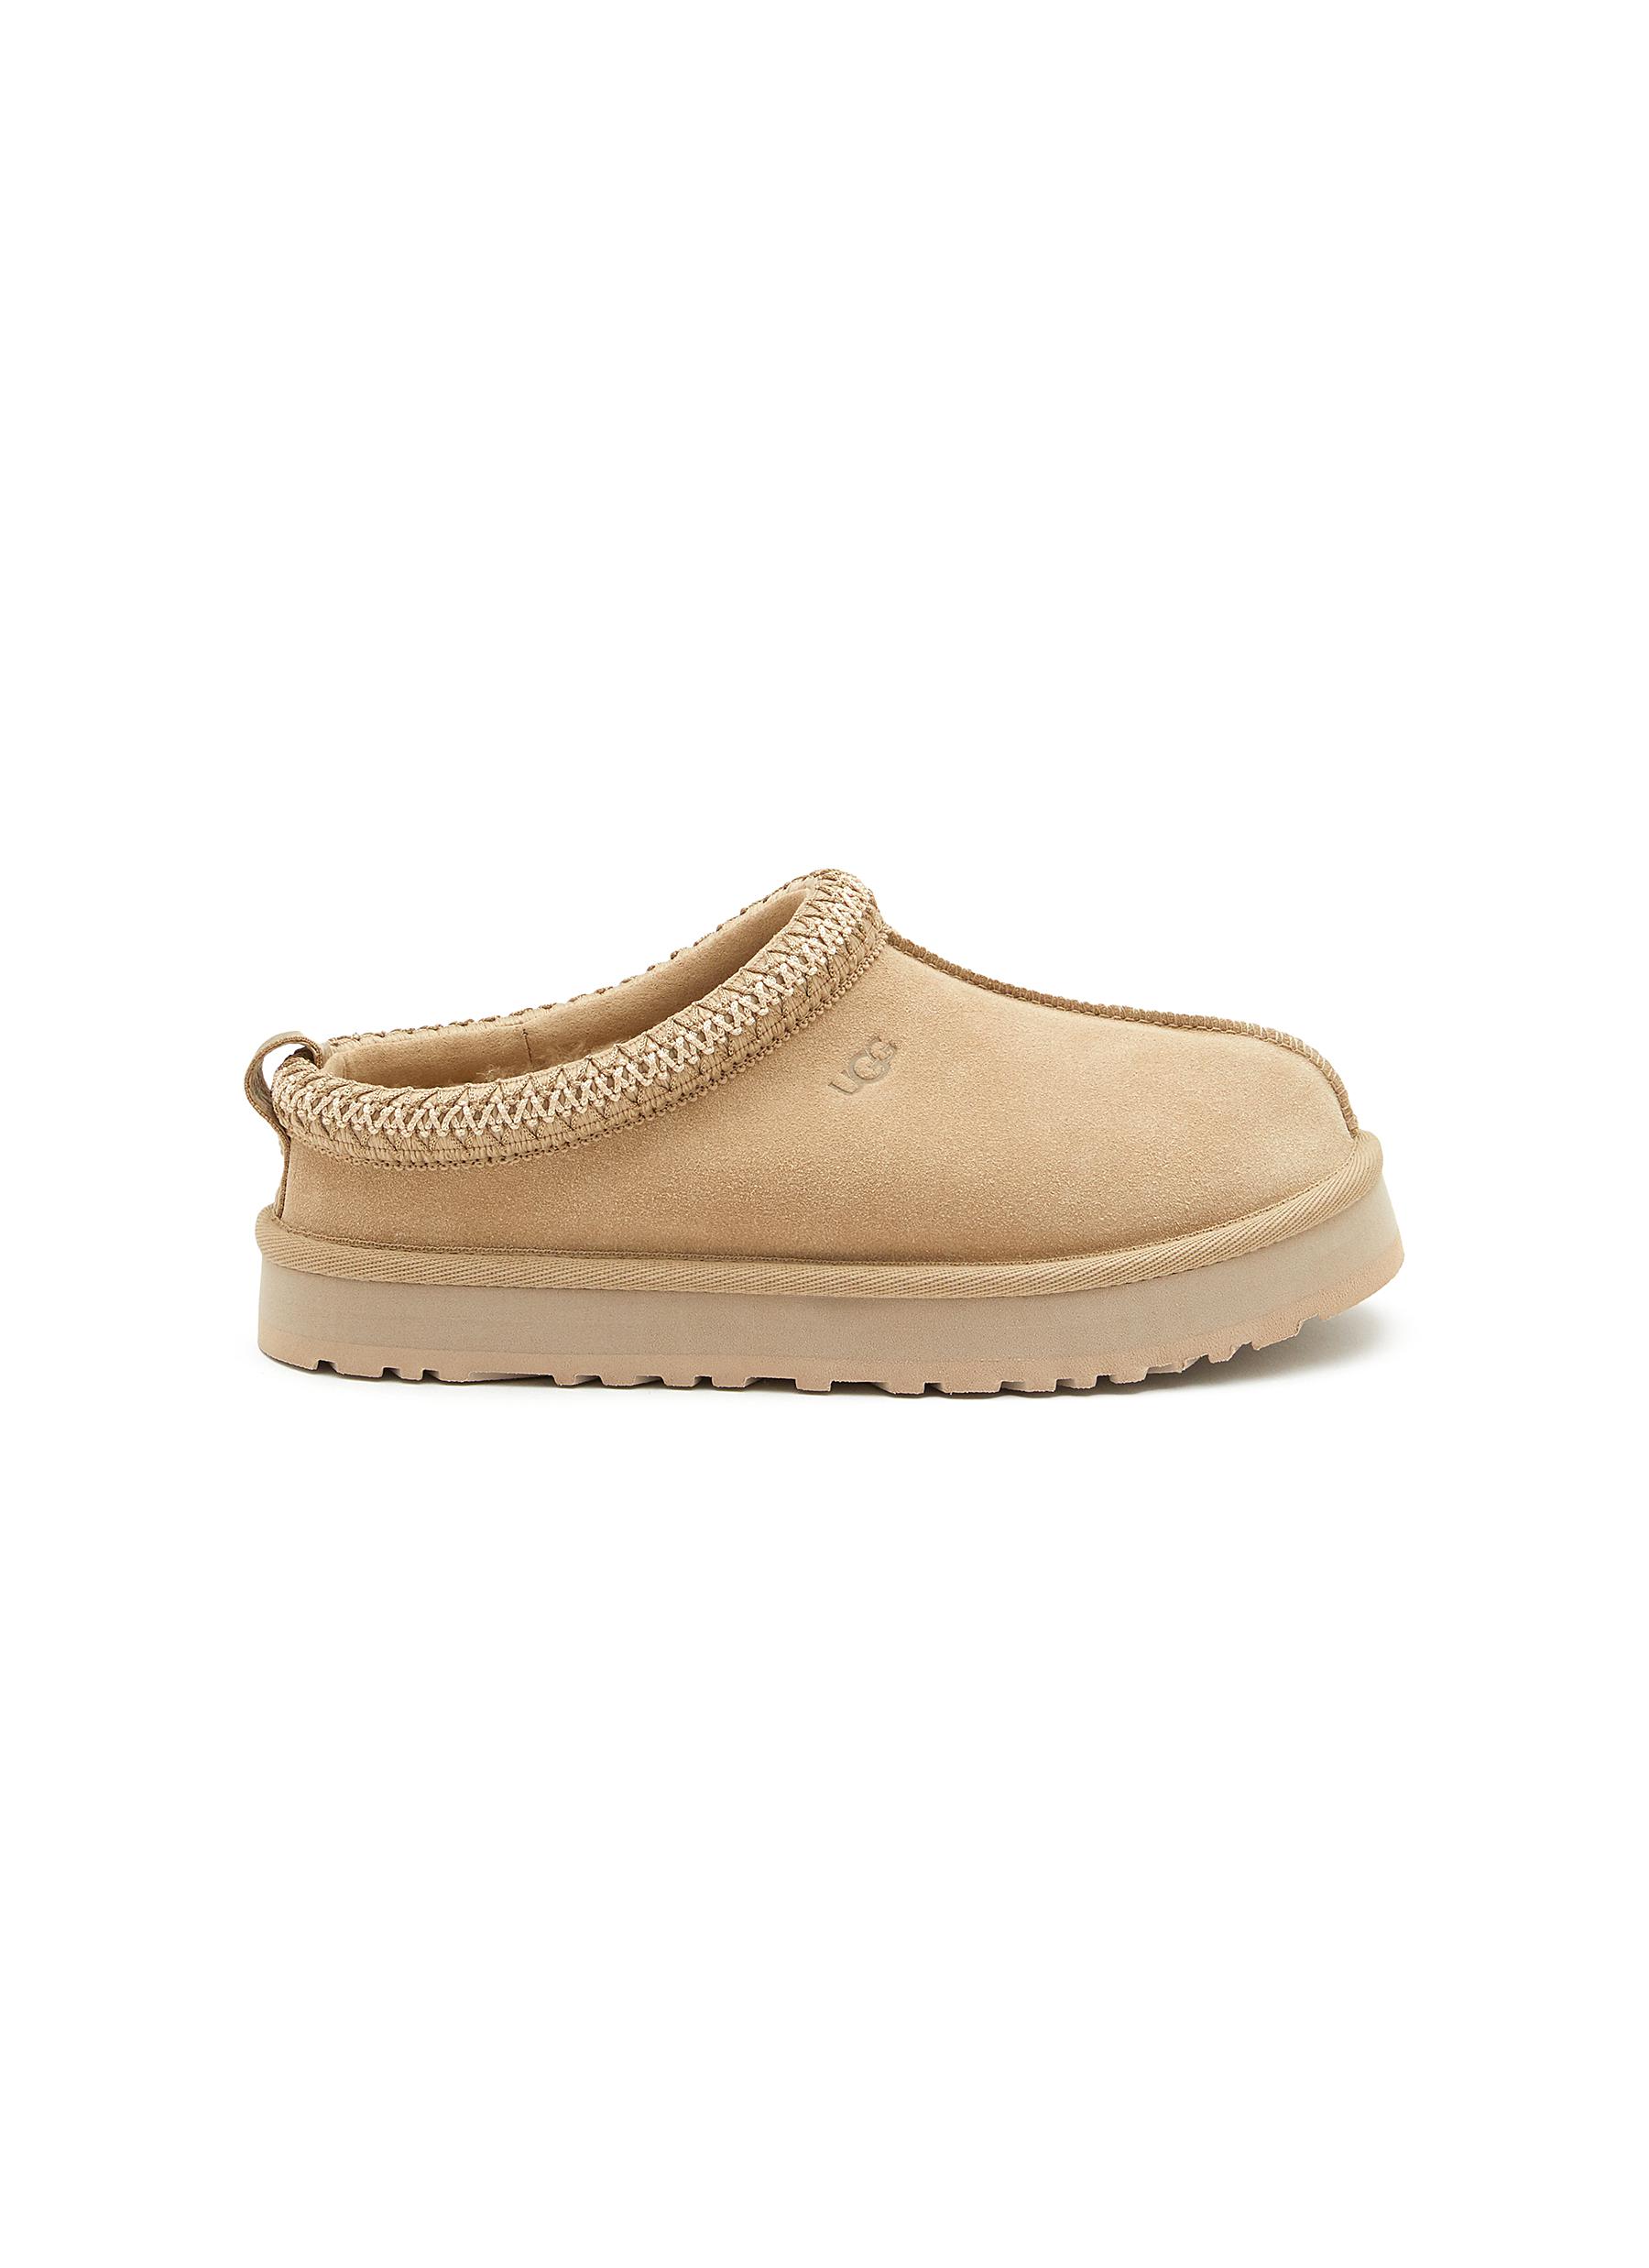 Ugg Tazz Kids Suede Slippers